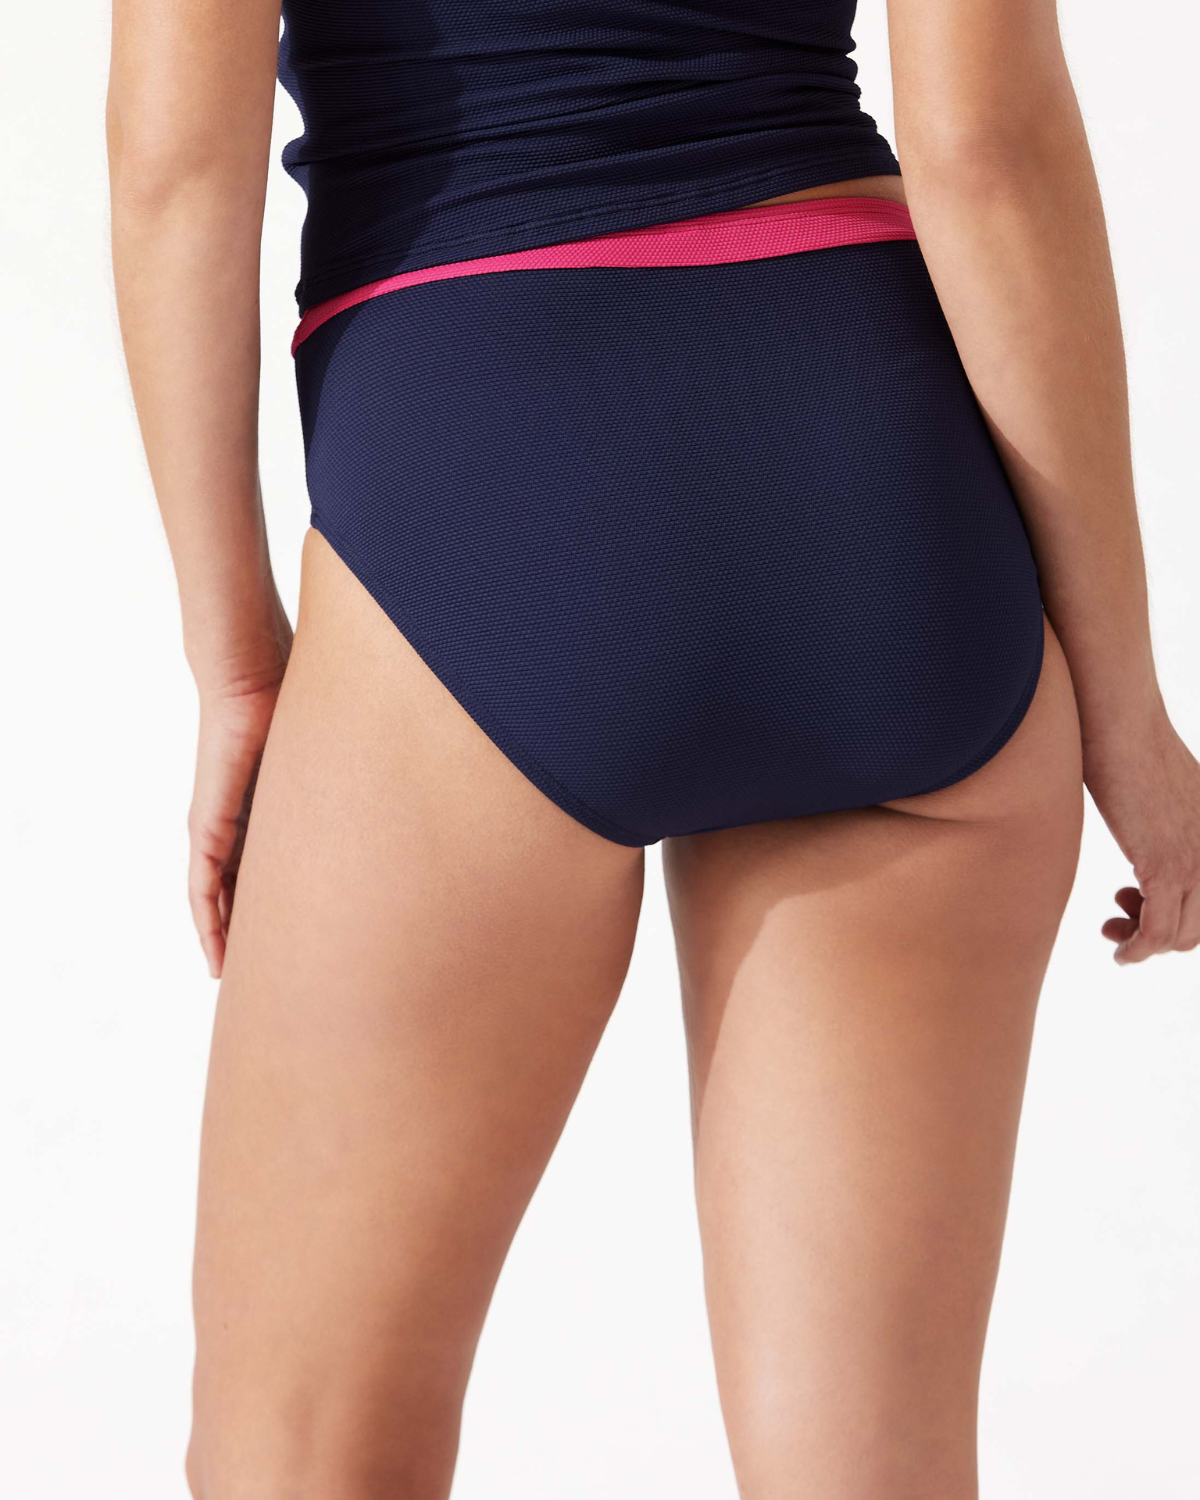 Model wearing a high waist bikini bottom in navy with a pink stripe at the top